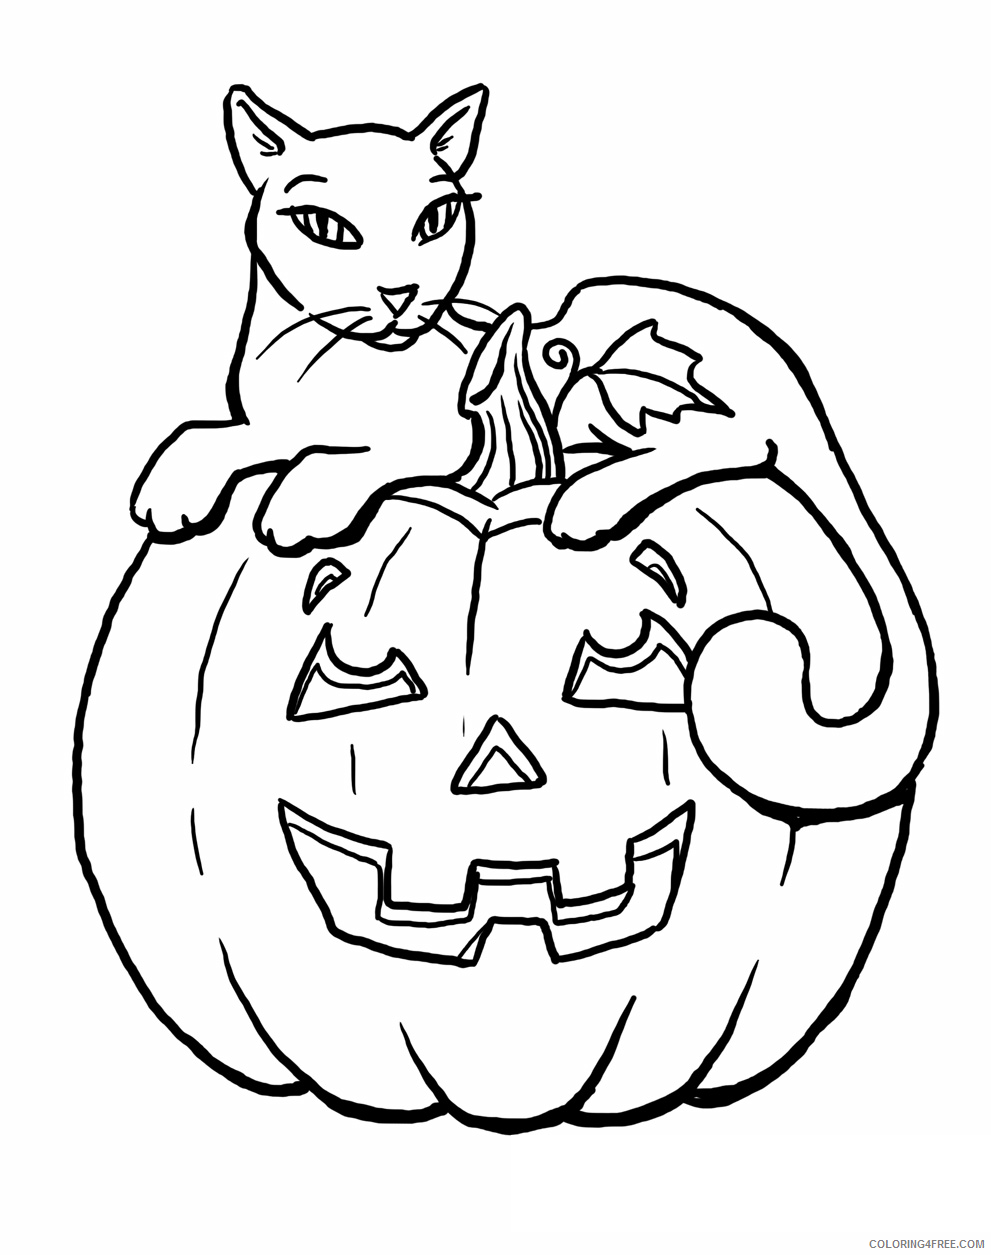 pumpkin cat coloring pages Coloring4free